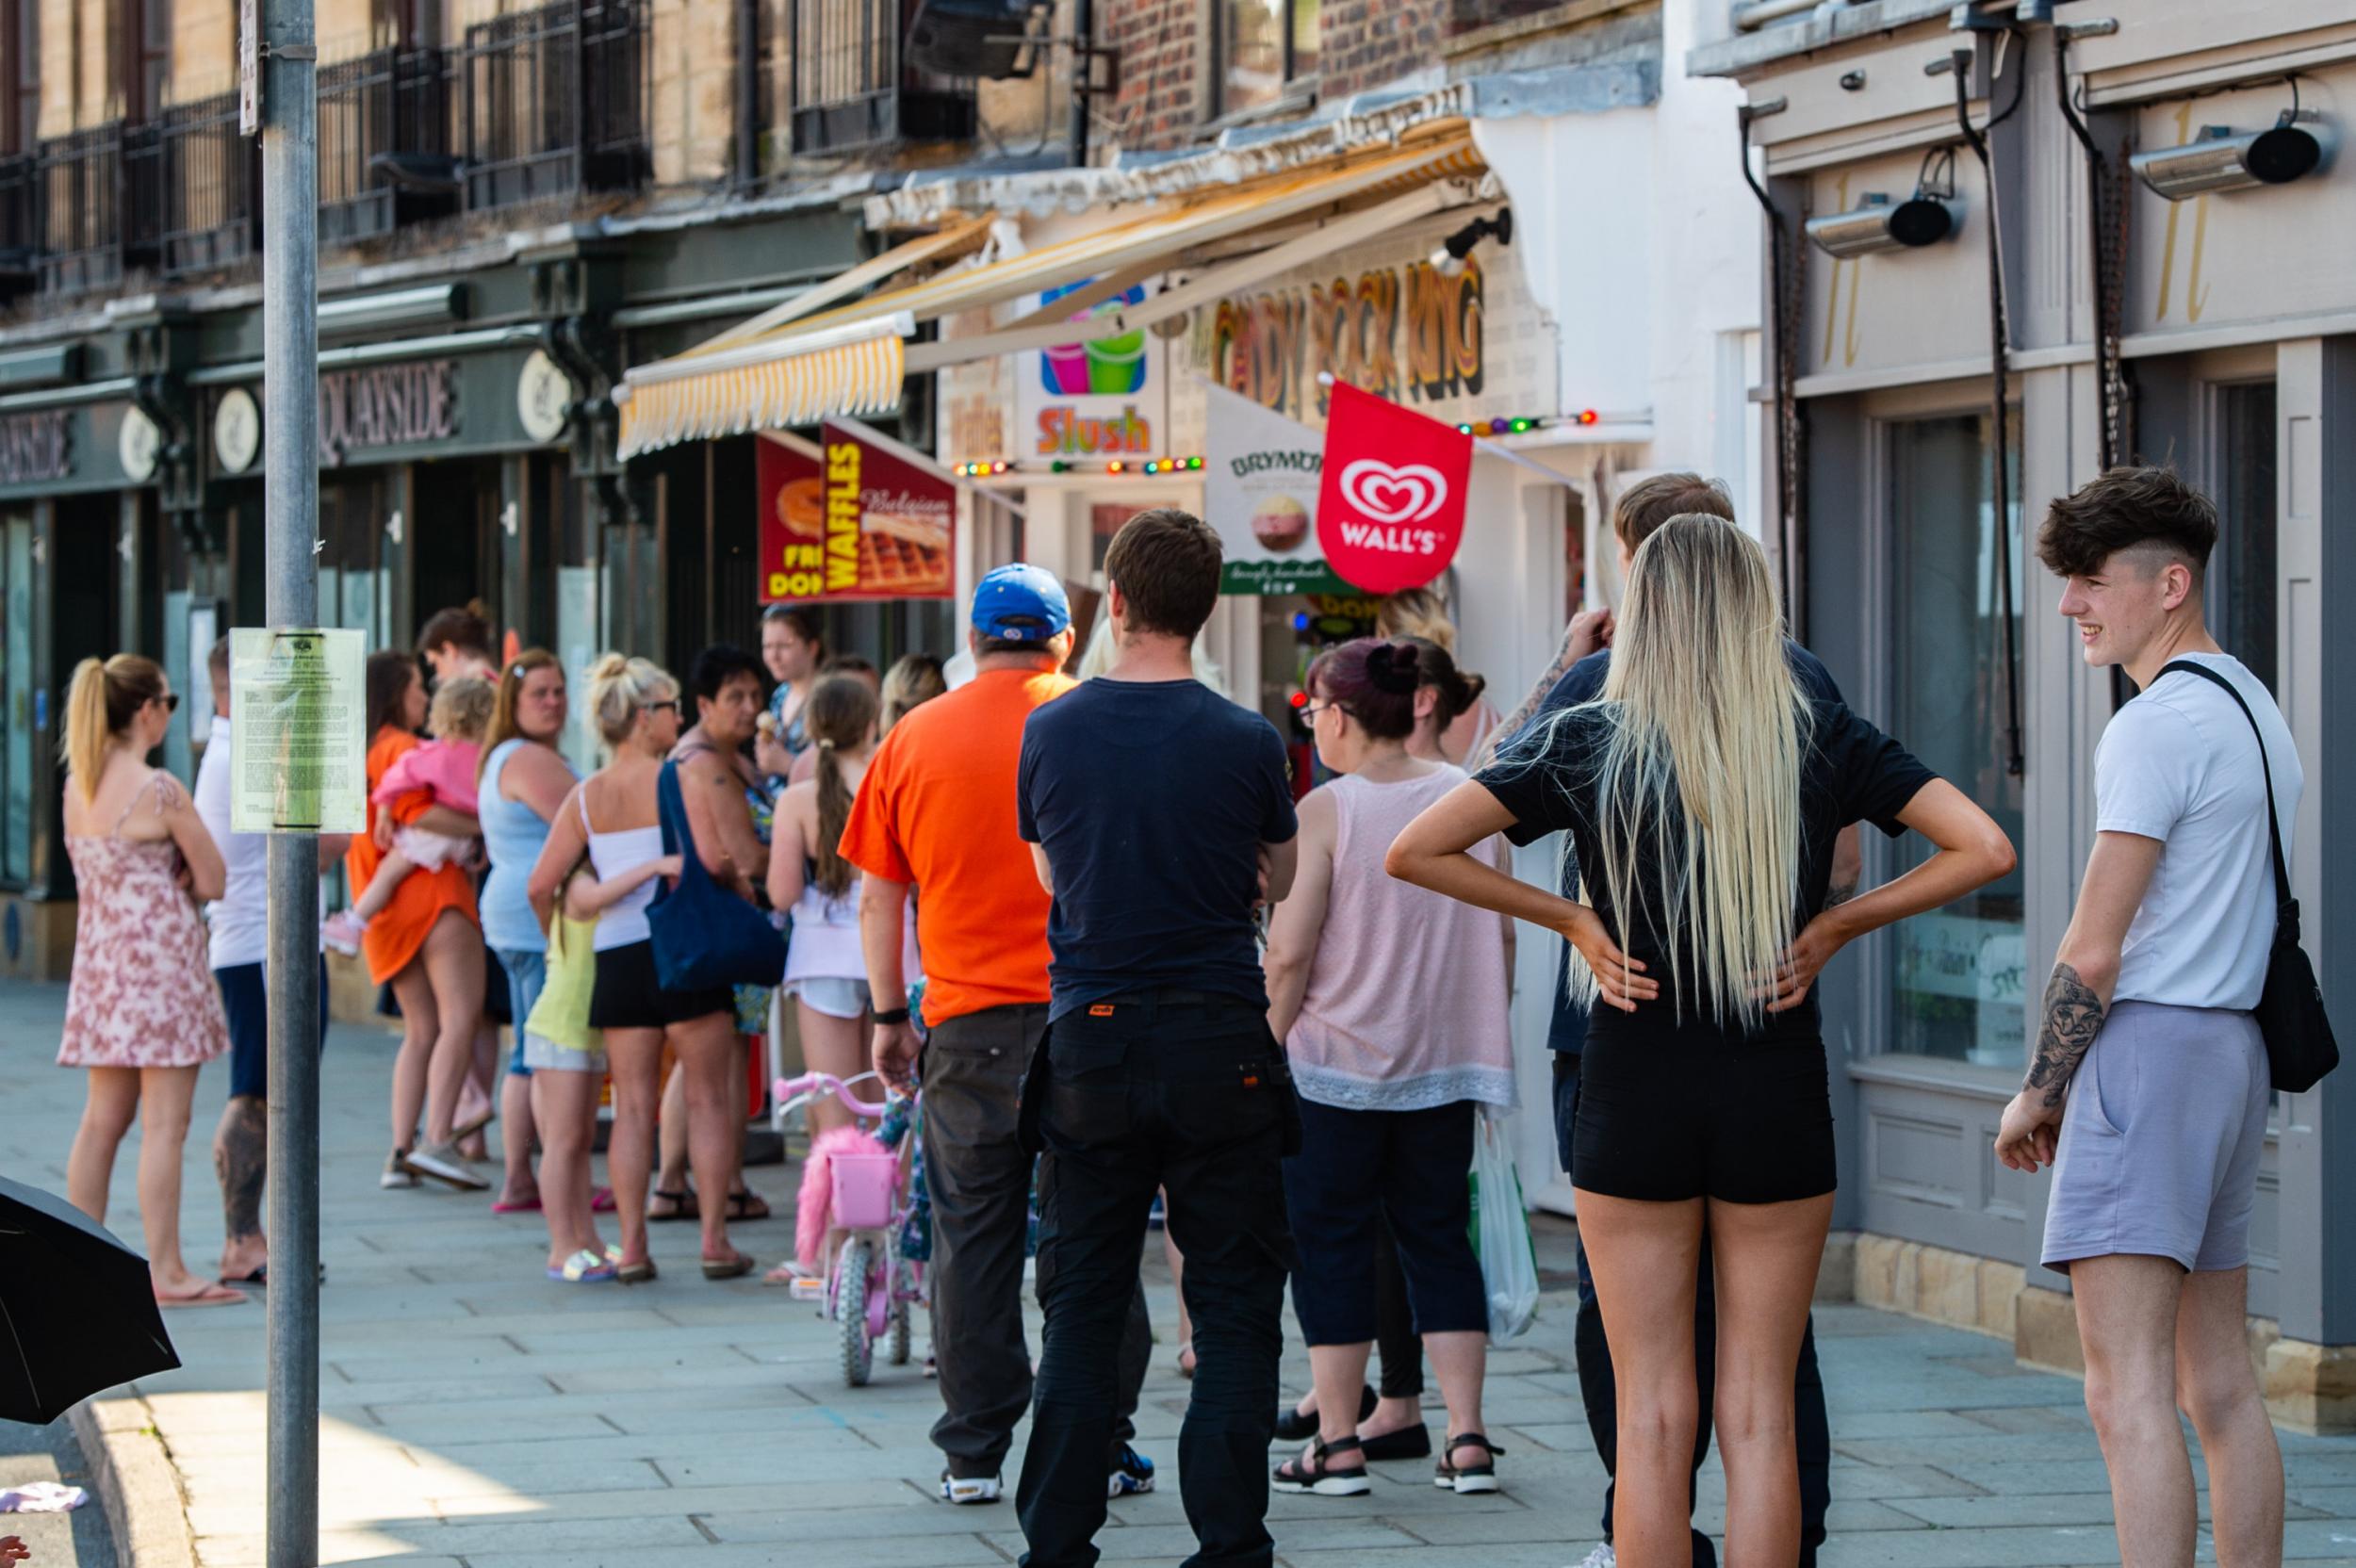 People try to observe 2-metre social distancing rules as they queue for ice-creams in Whitby (SWNS )